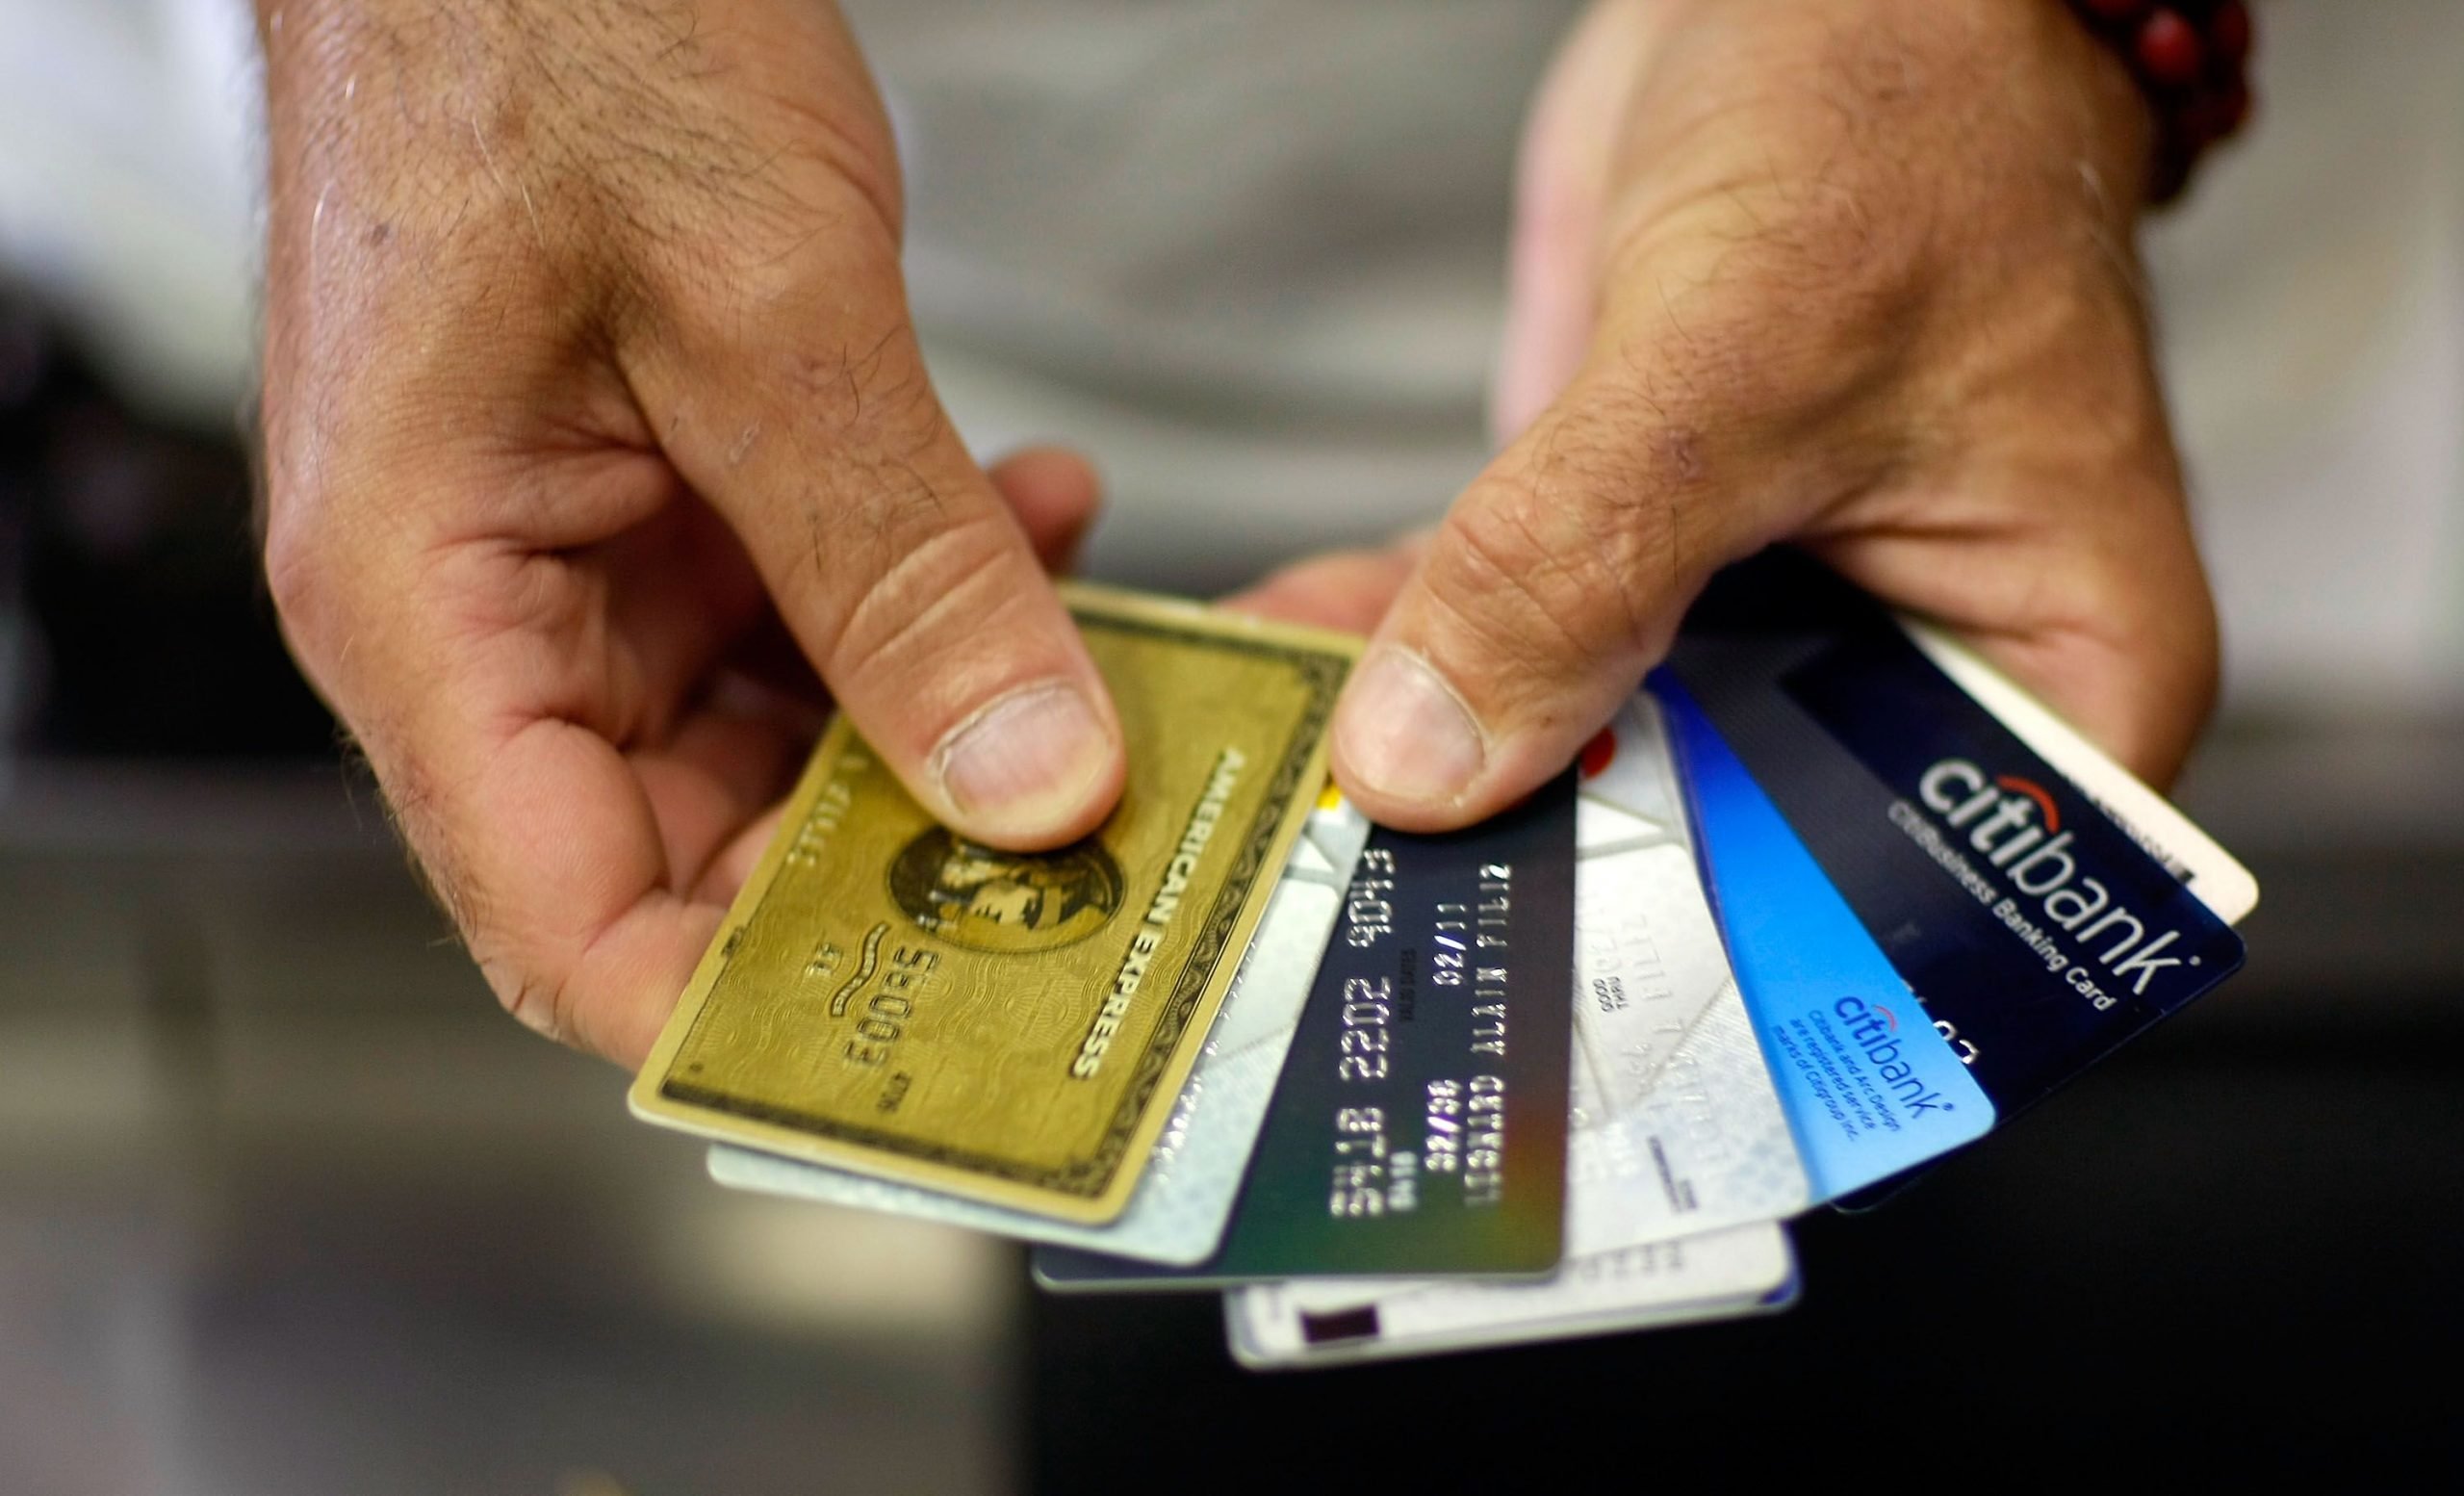 Does Opening A New Credit Card Affect Credit Score